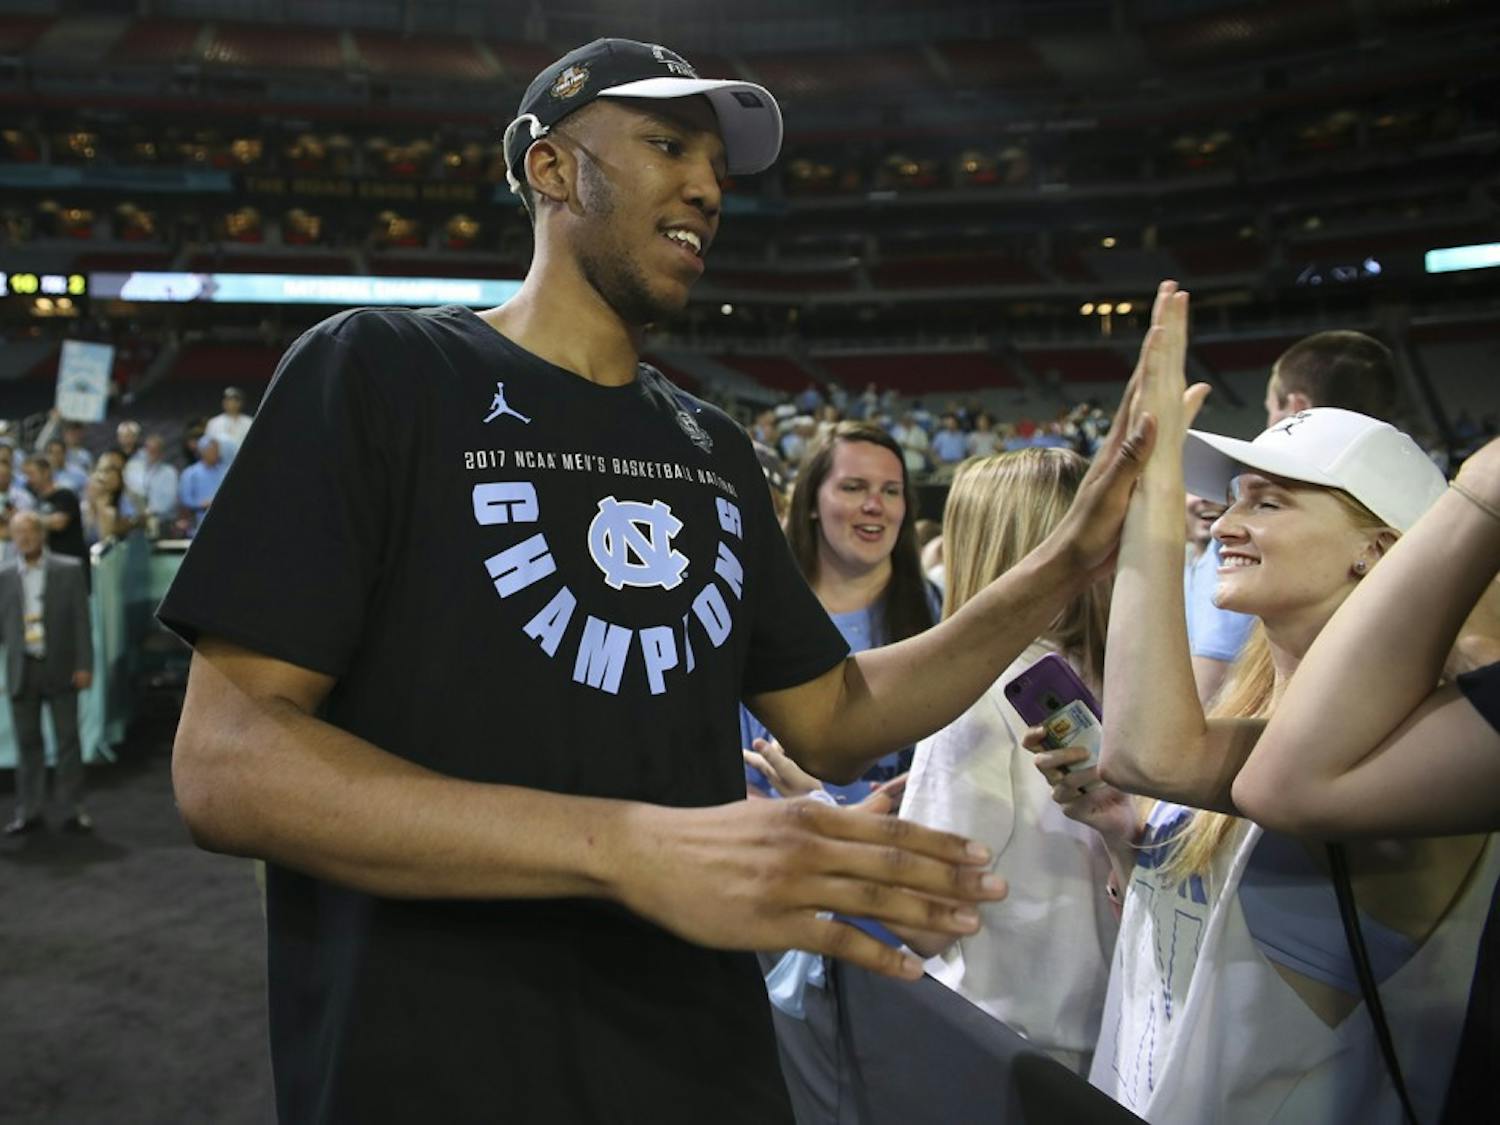 North Carolina forward Tony Bradley greets fans after the men's basketball team's victory in the&nbsp;national championship.